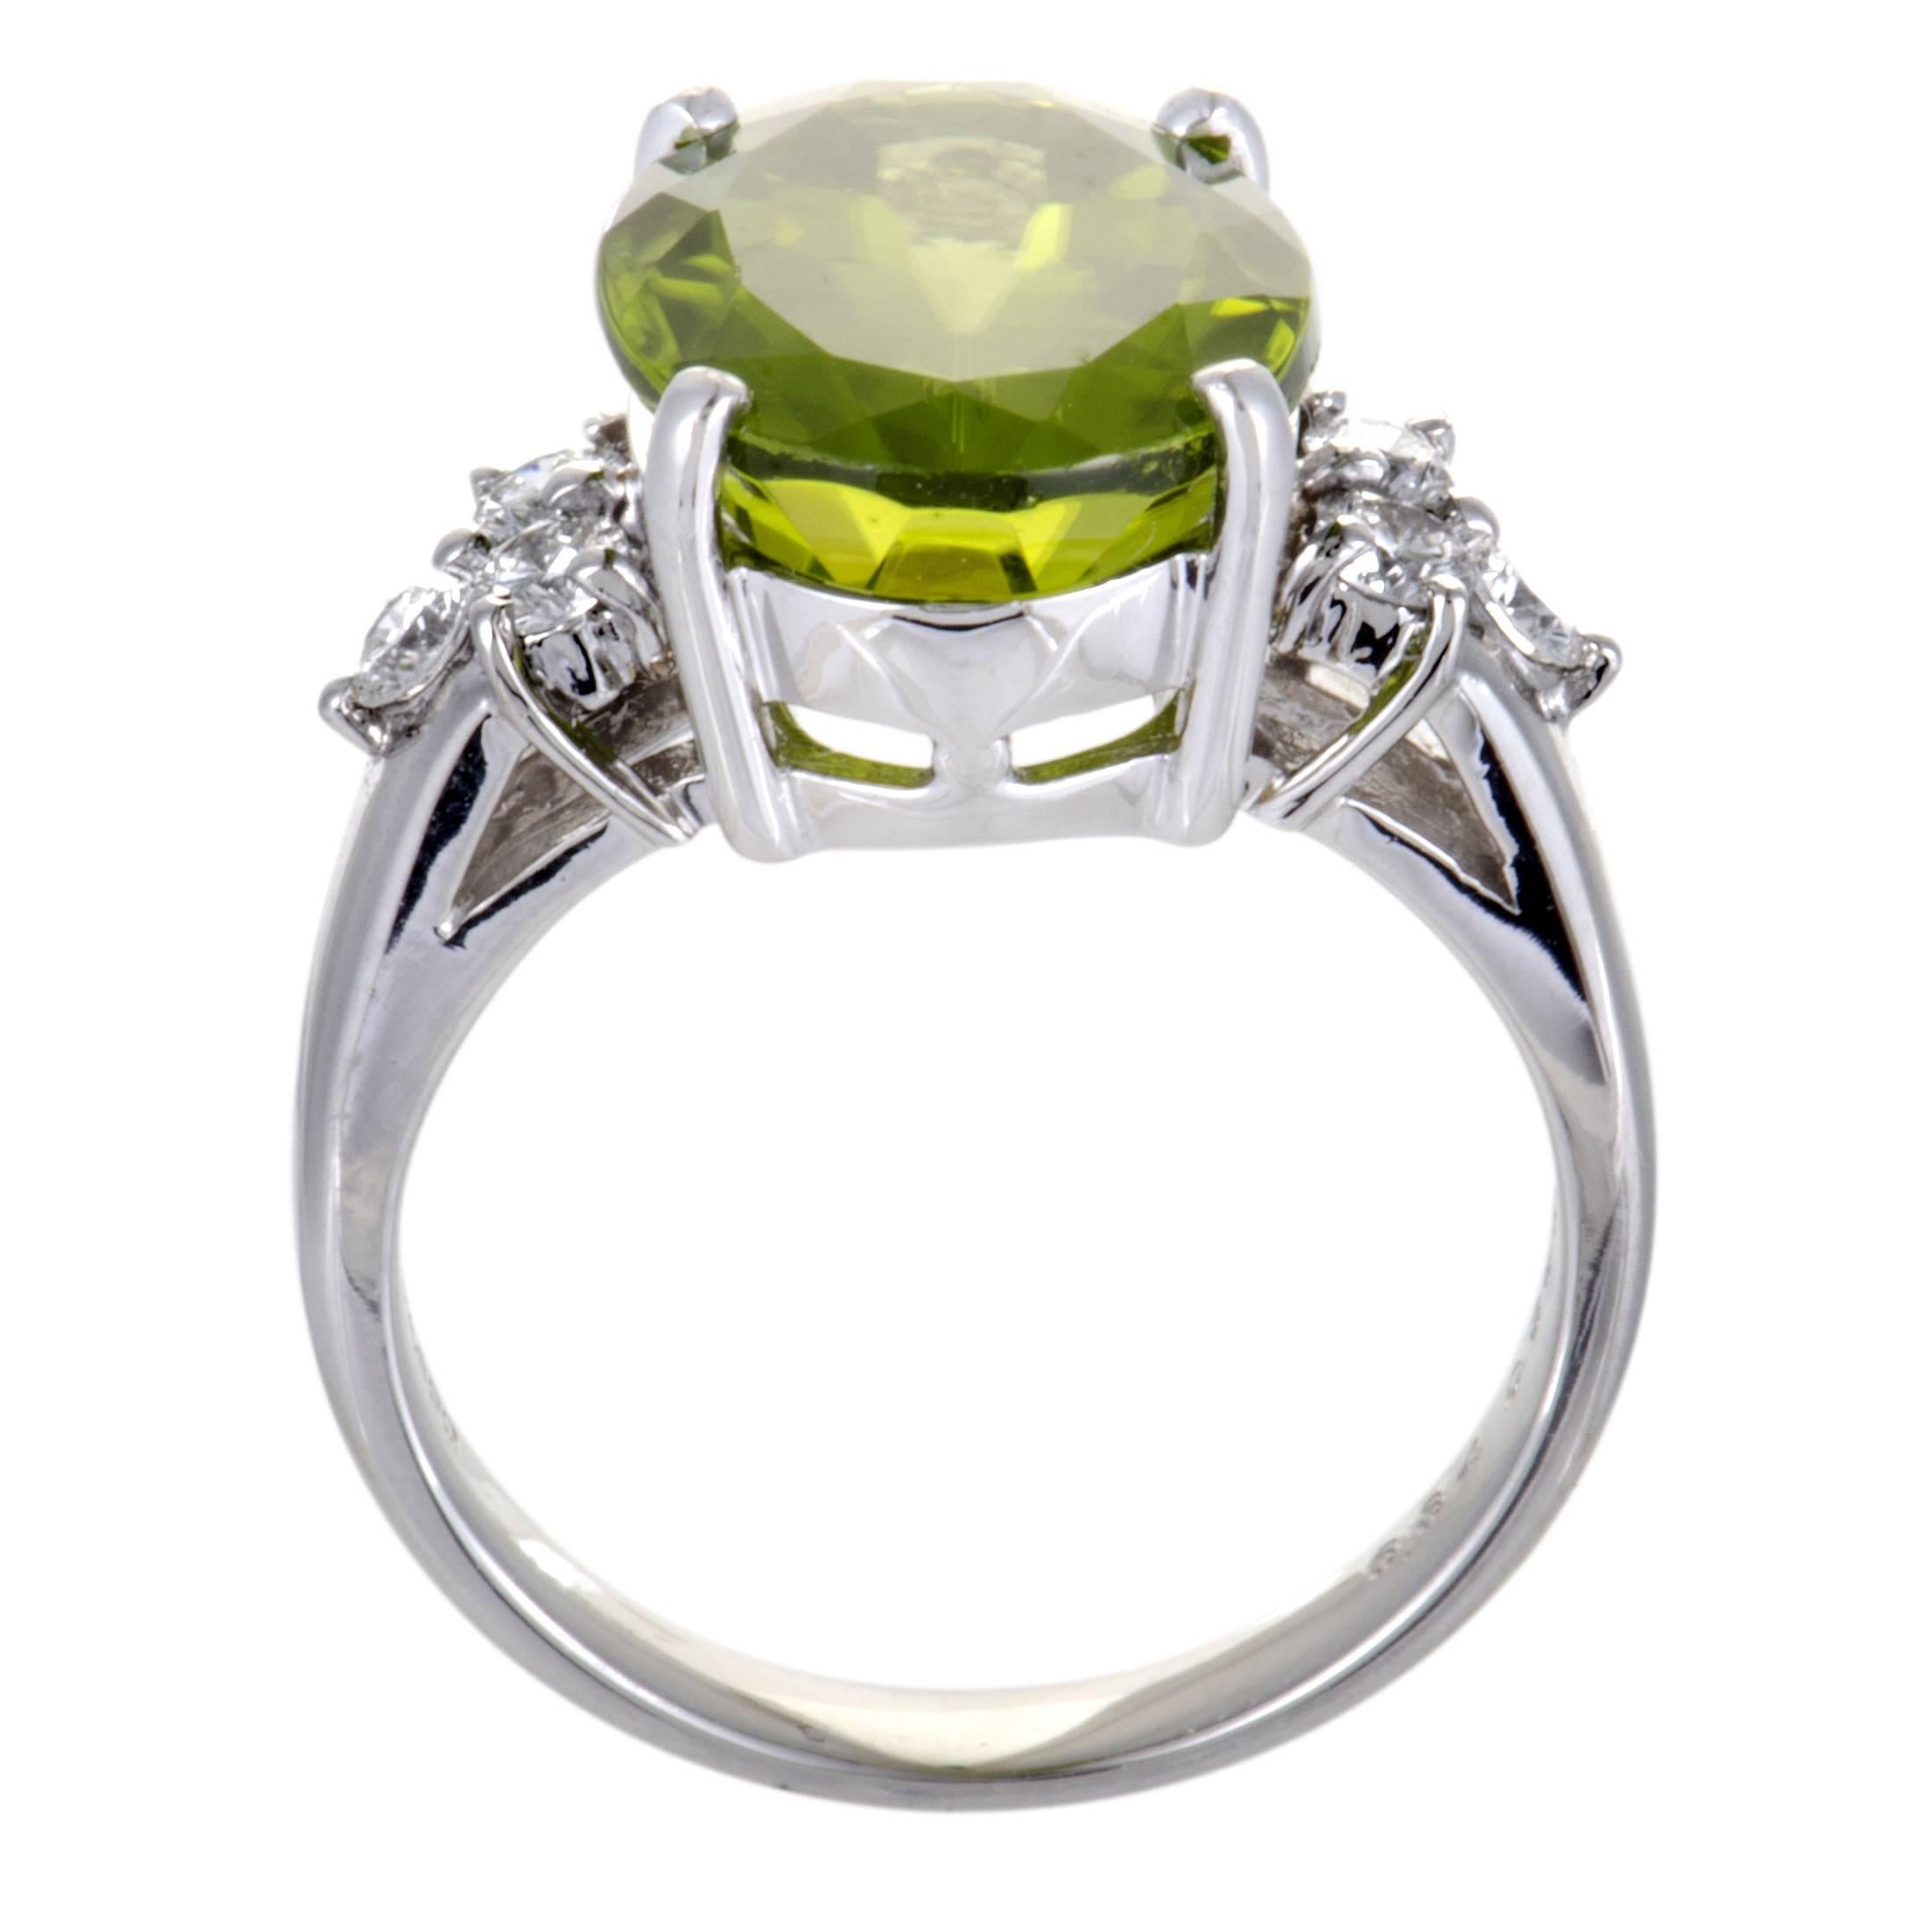 This exquisite platinum ring features an extravagantly feminine appeal and a radiantly alluring style. The gorgeous ring includes 0.35ct of dazzling diamonds and a of sparkling peridot of 6.84ct that elevates the charming appeal of the glamorous